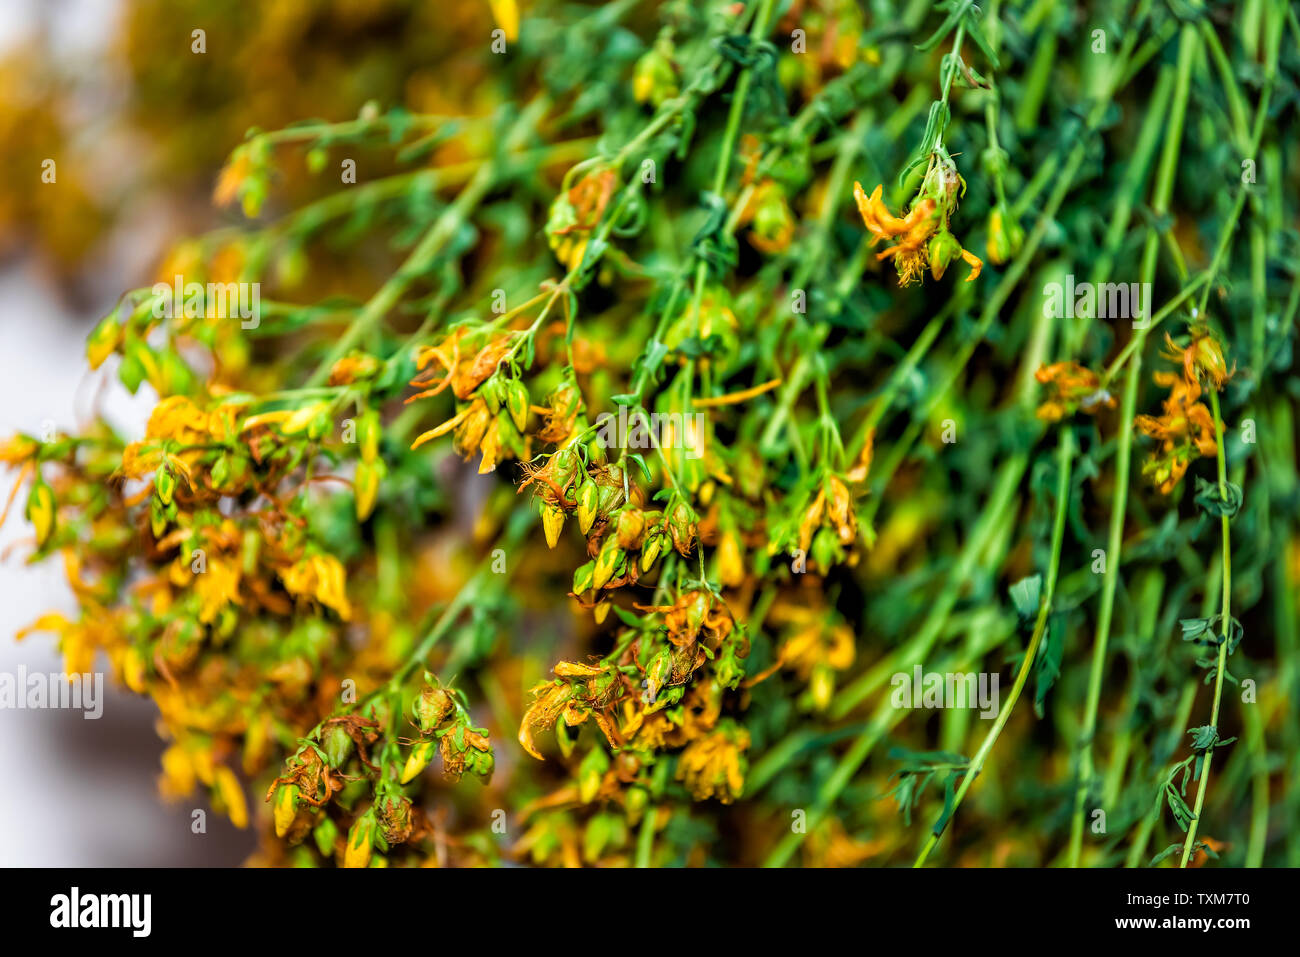 Dried drying medicinal green herb with yellow flowers called Saint John's wort for treating depression Stock Photo